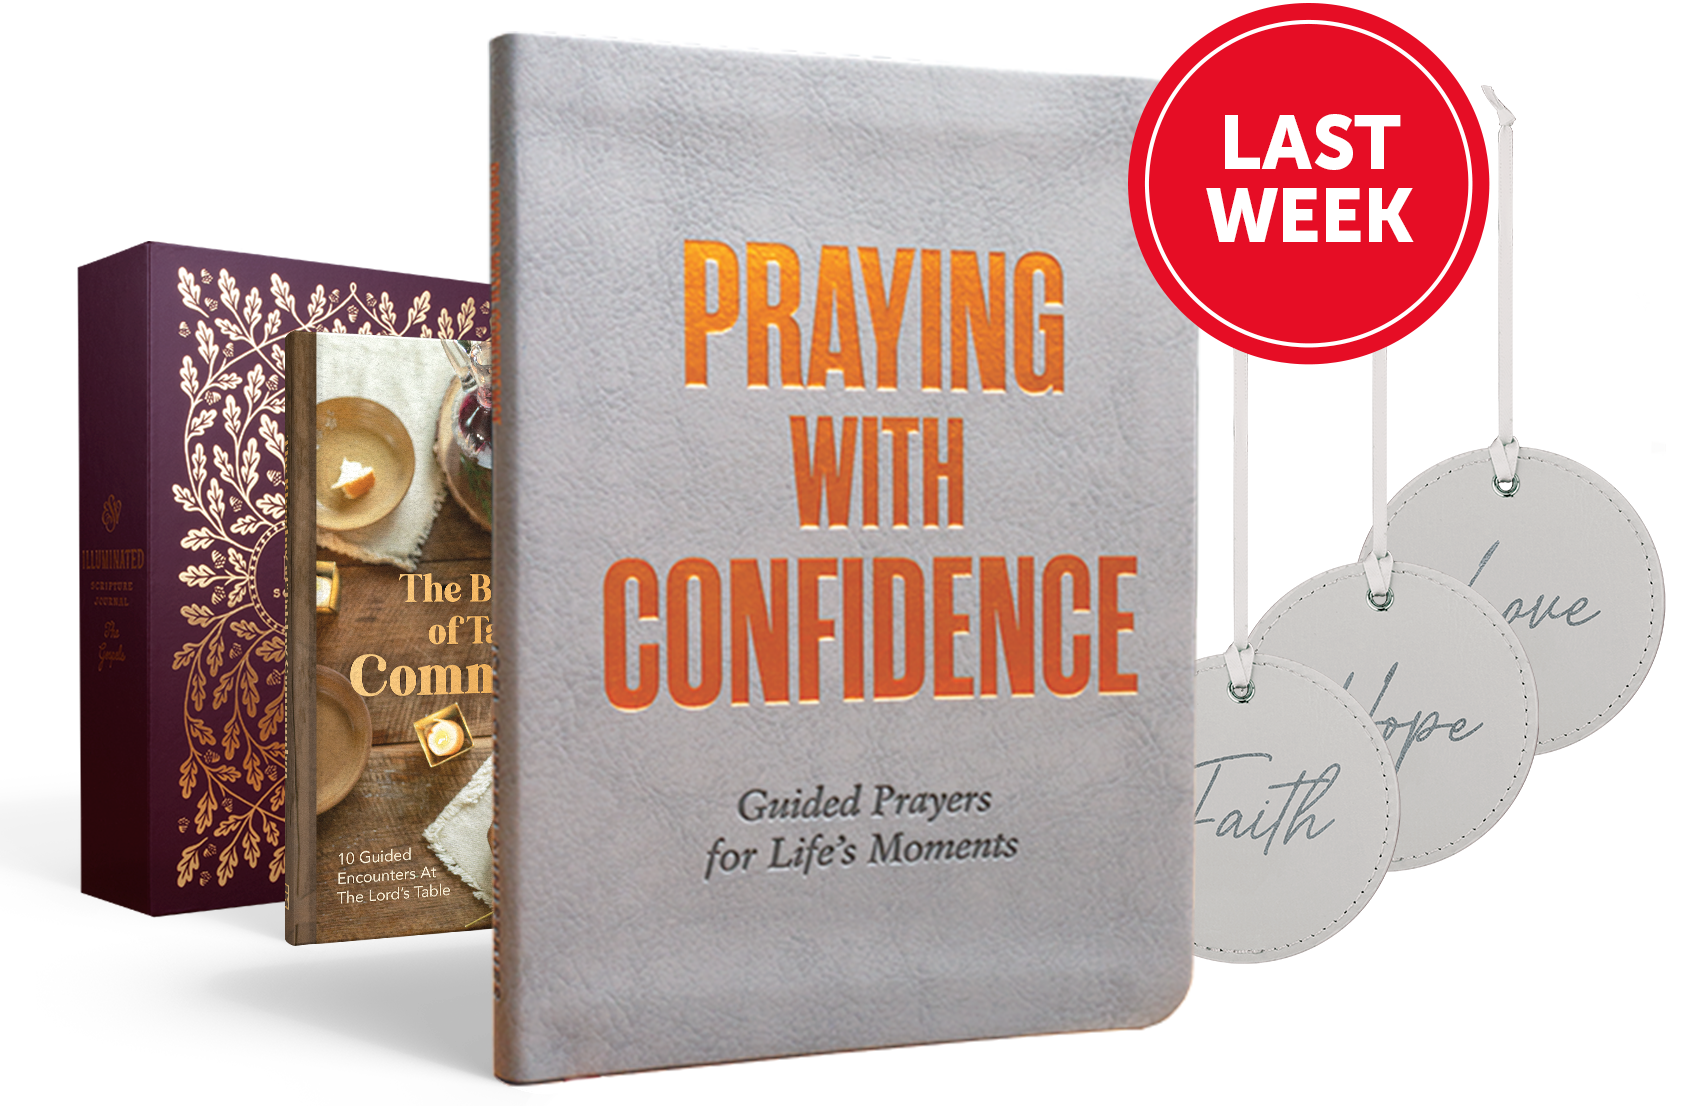 Praying With Confidence